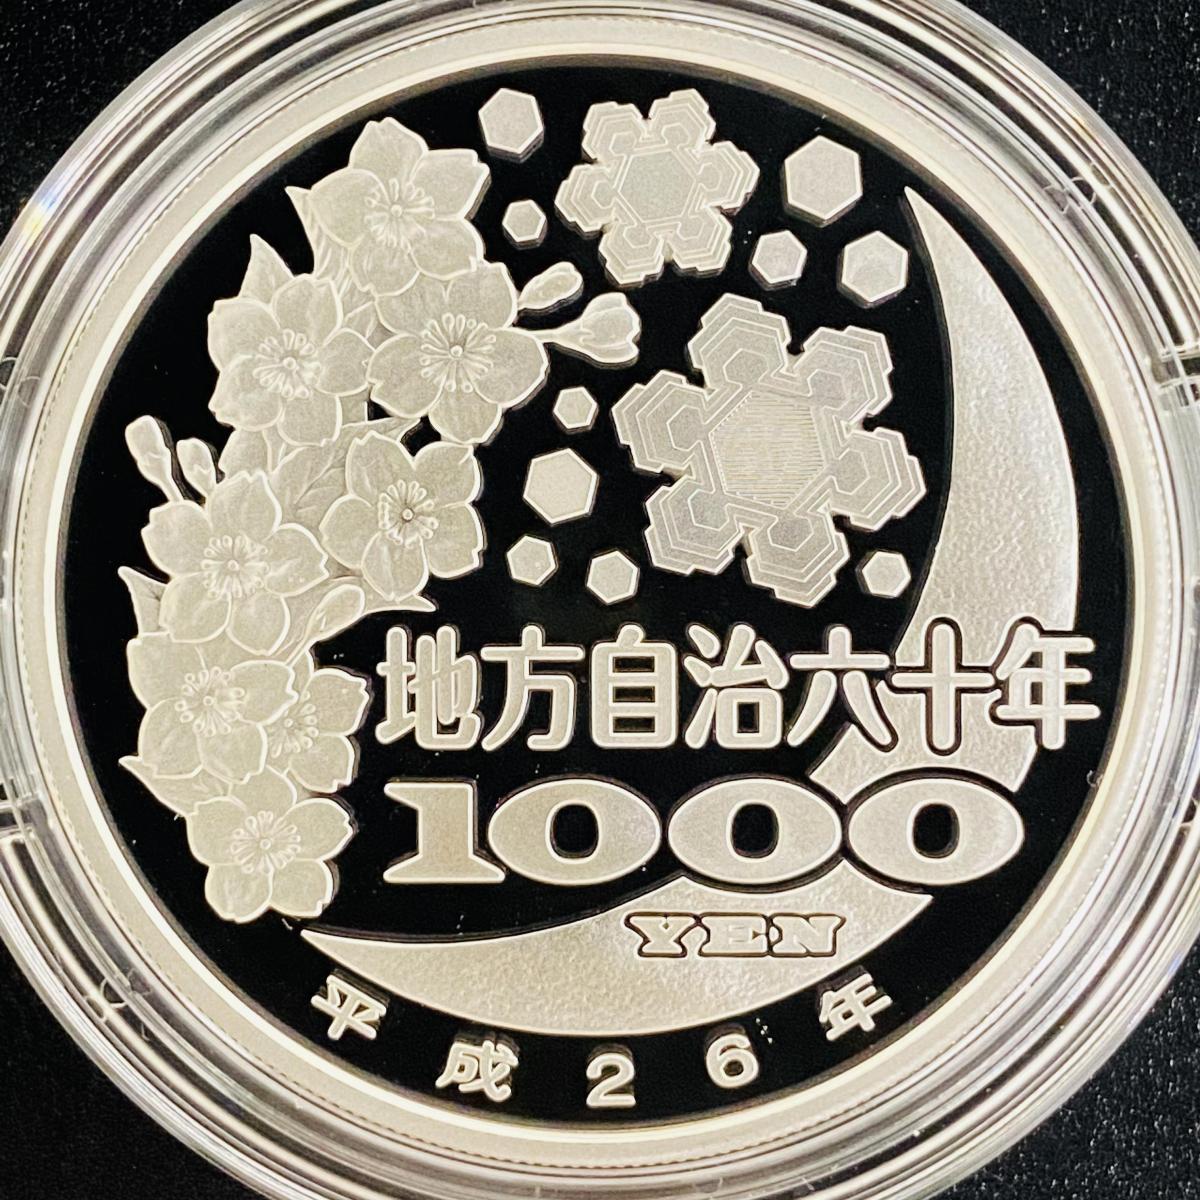  local government law . line 60 anniversary commemoration Yamagata prefecture district thousand jpy silver coin proof money set A set silver approximately 31.1g prefectures commemorative coin precious metal medal region coin structure . department 